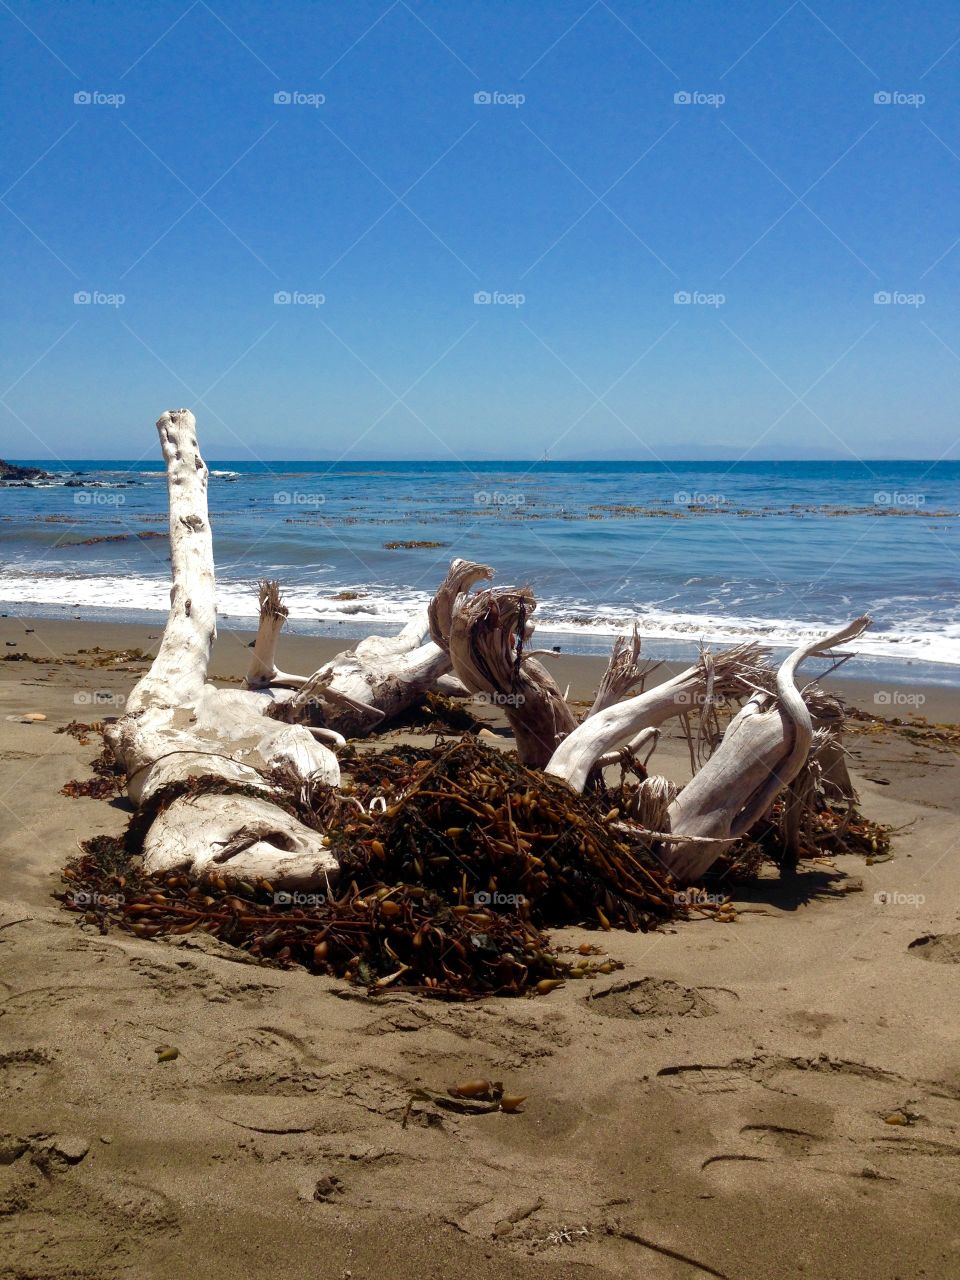 Dead tree. Taken in palos verdes by the beach while hiking
